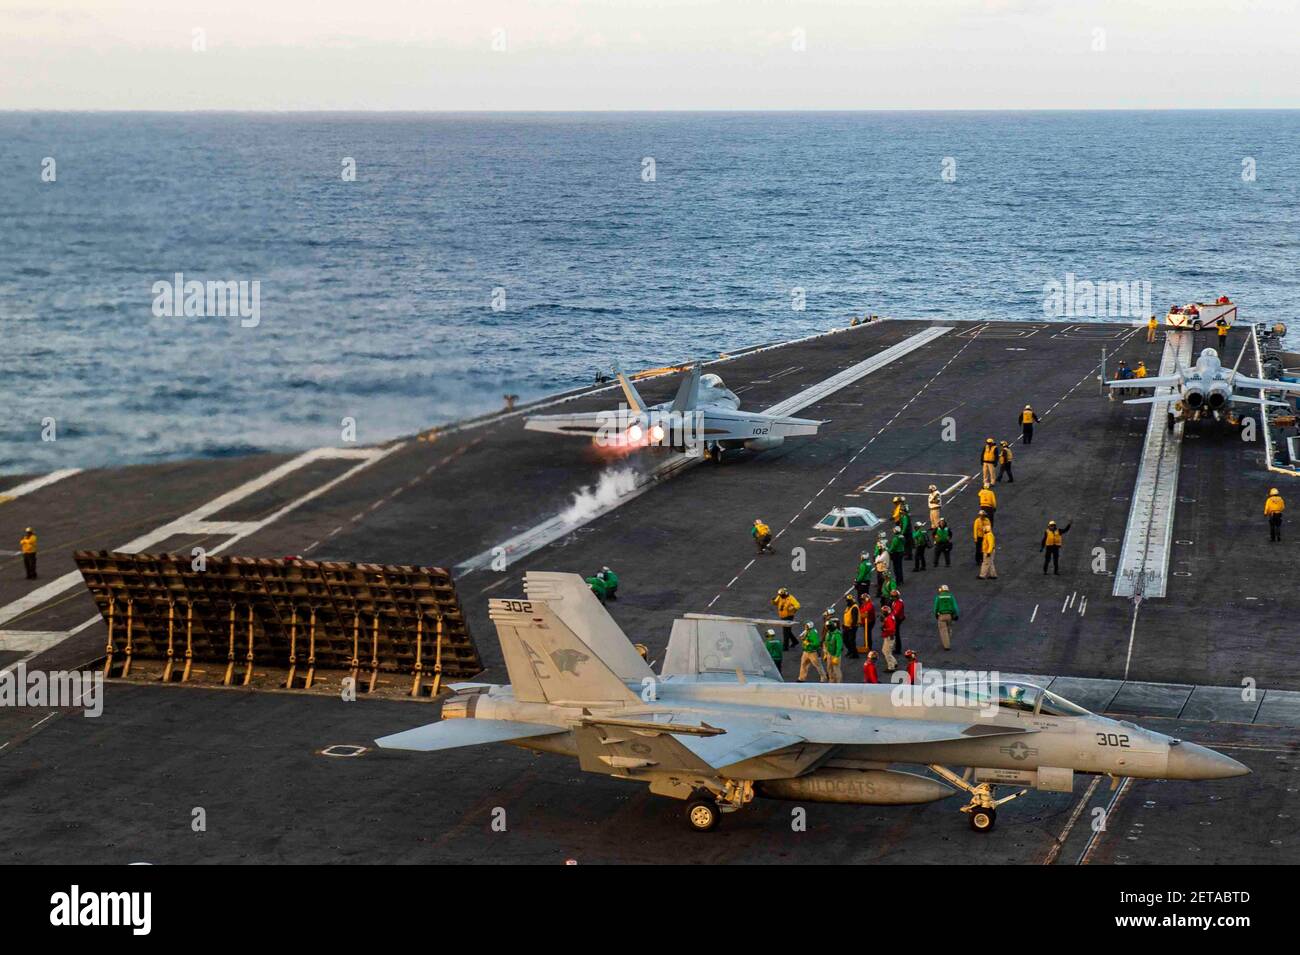 A U.S. Navy F/A-18F Super Hornet, from the Fighting Swordsmen of Strike Fighter Squadron 32, flies past the flight deck aboard the Nimitz-class aircraft carrier USS Dwight D. Eisenhower February 28, 2021 in the Atlantic Ocean. Stock Photo